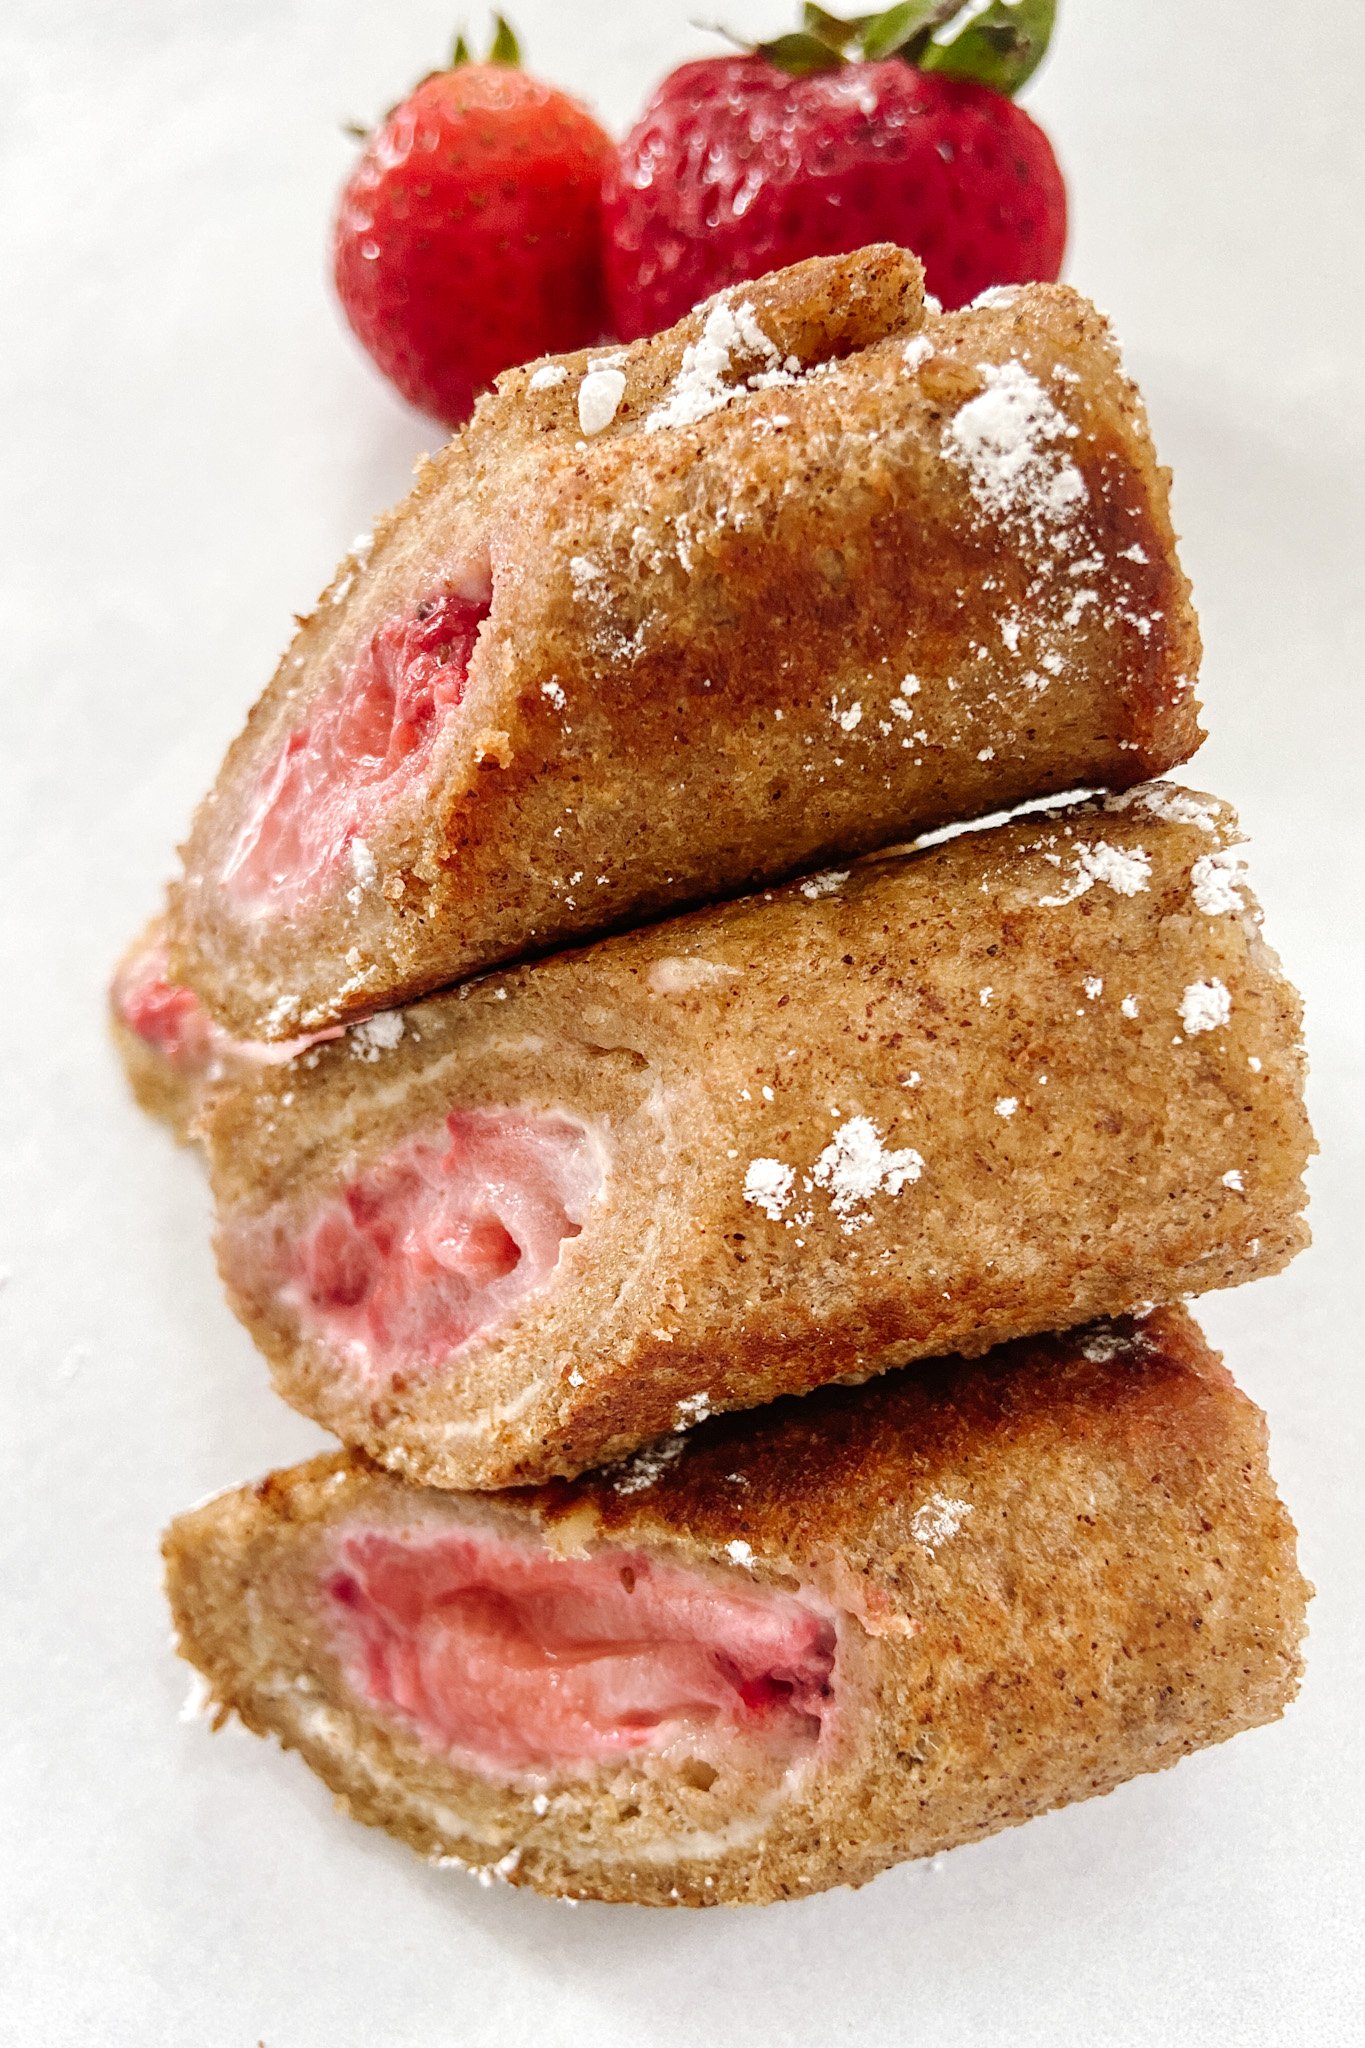 Strawberry cheesecake rollups served with strawberries and lightly dusted with powdered sugar